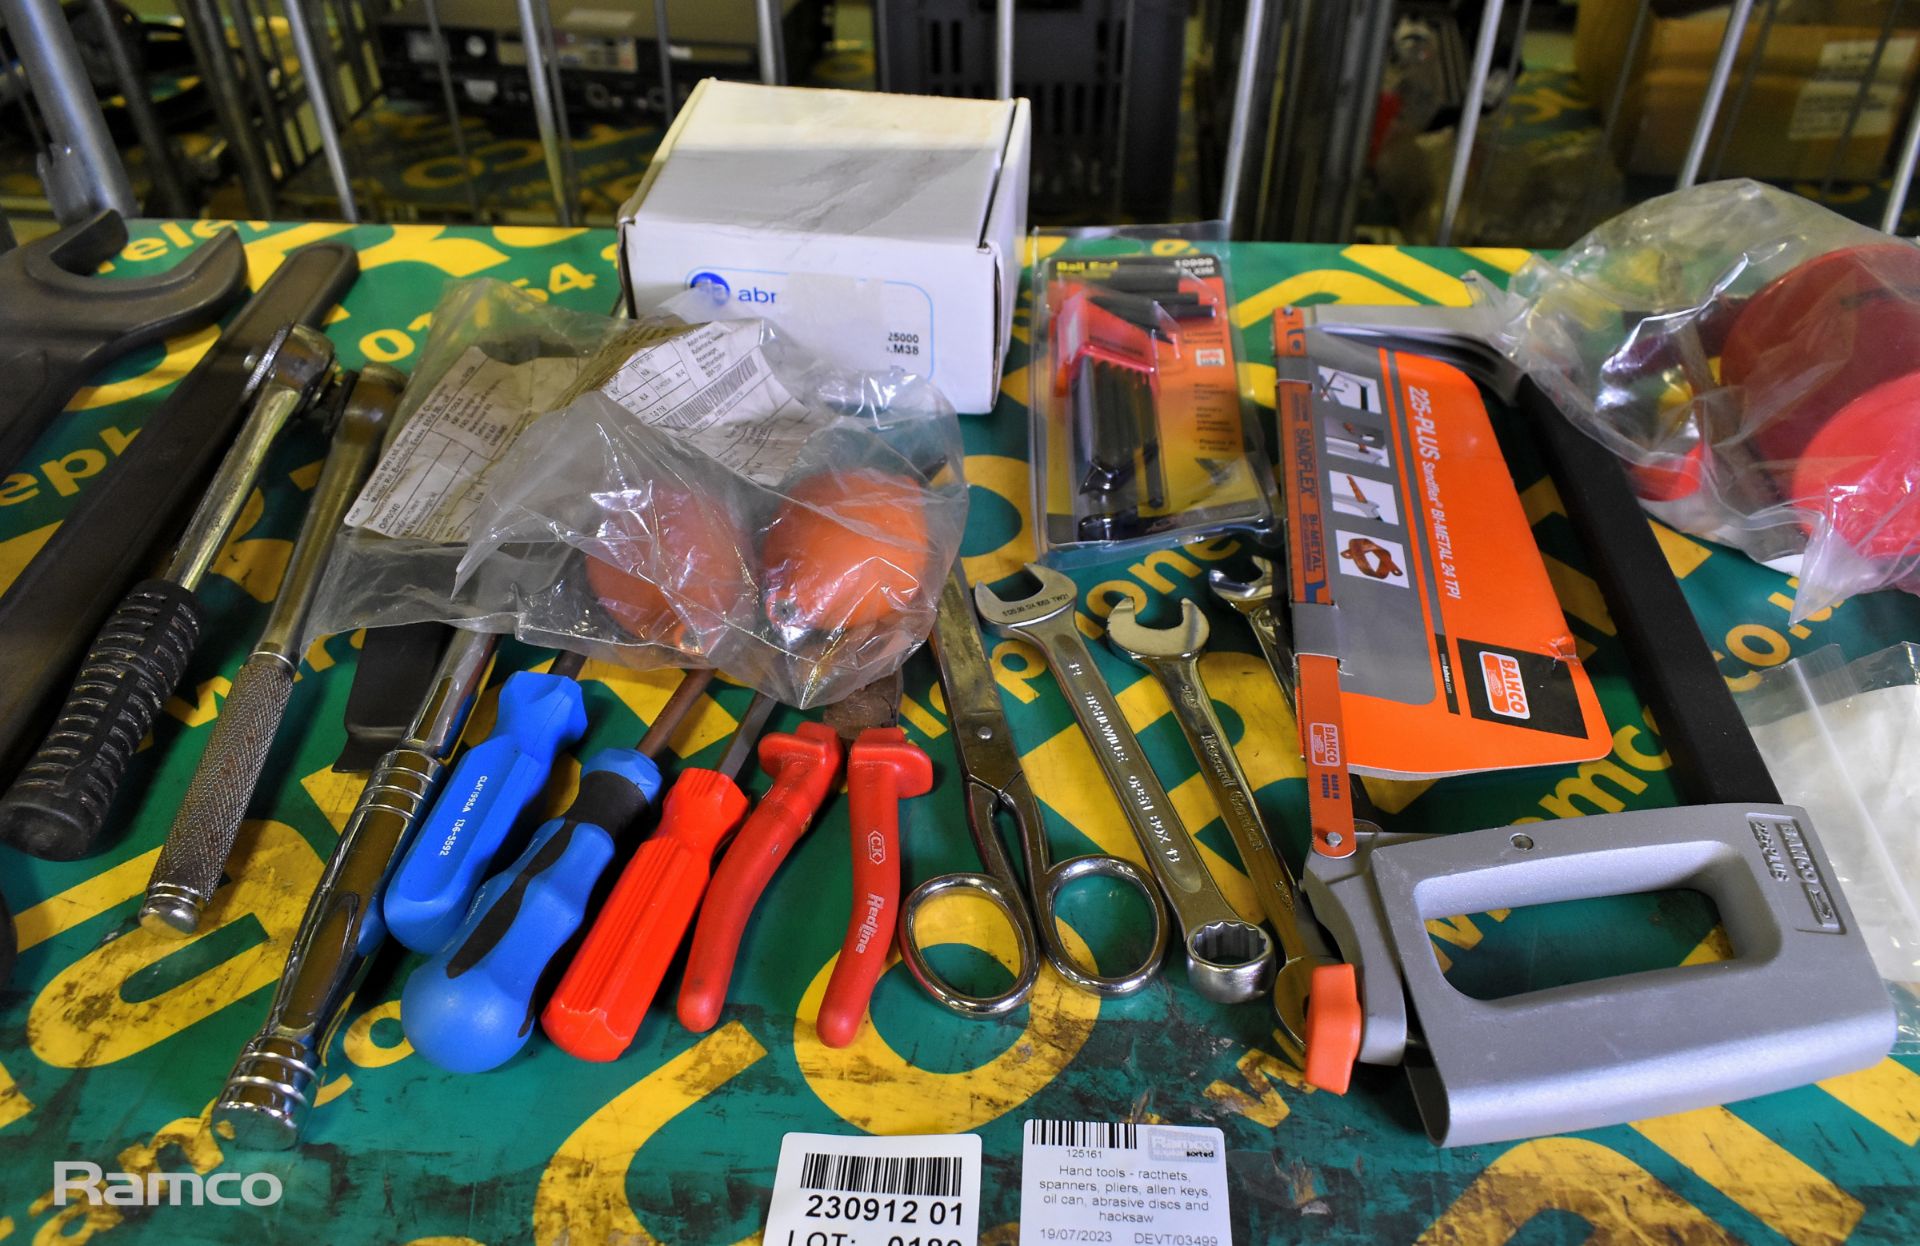 Hand tools - ratchets, spanners, pliers, allen keys, oil can, abrasive discs and hacksaw - Image 3 of 5